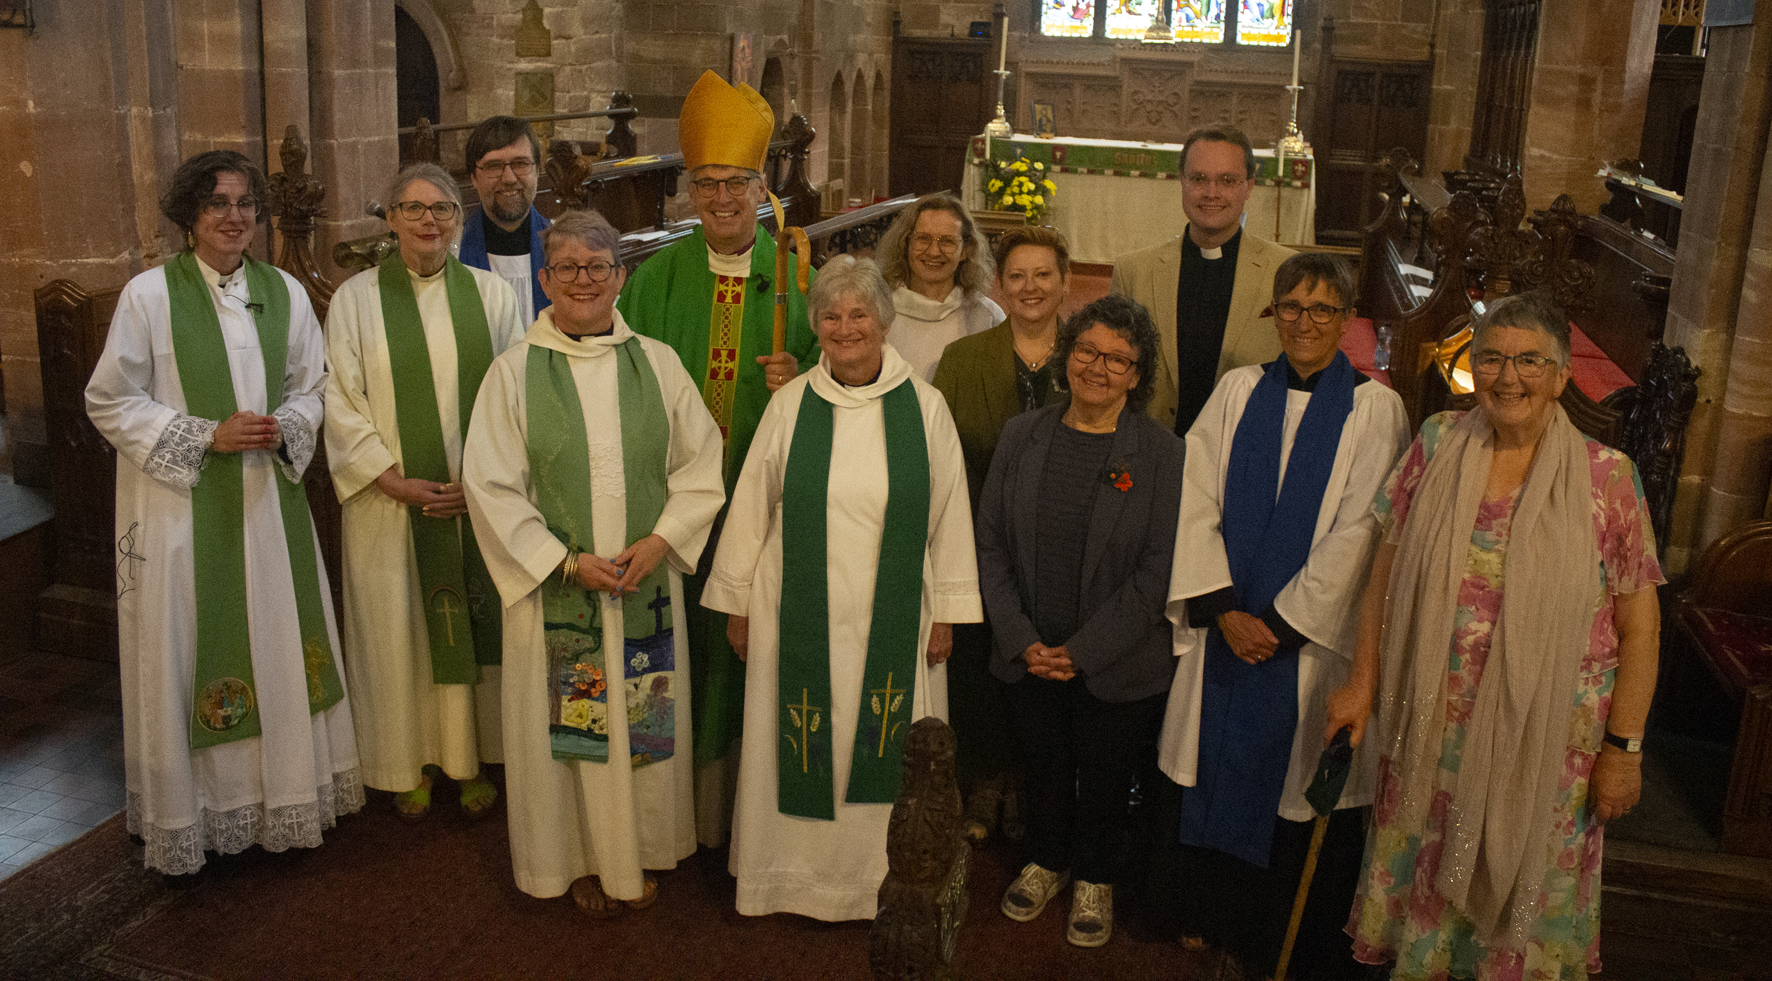 Clergy and laity at St John's Church in Halesowen with Hazel and Bishop Martin